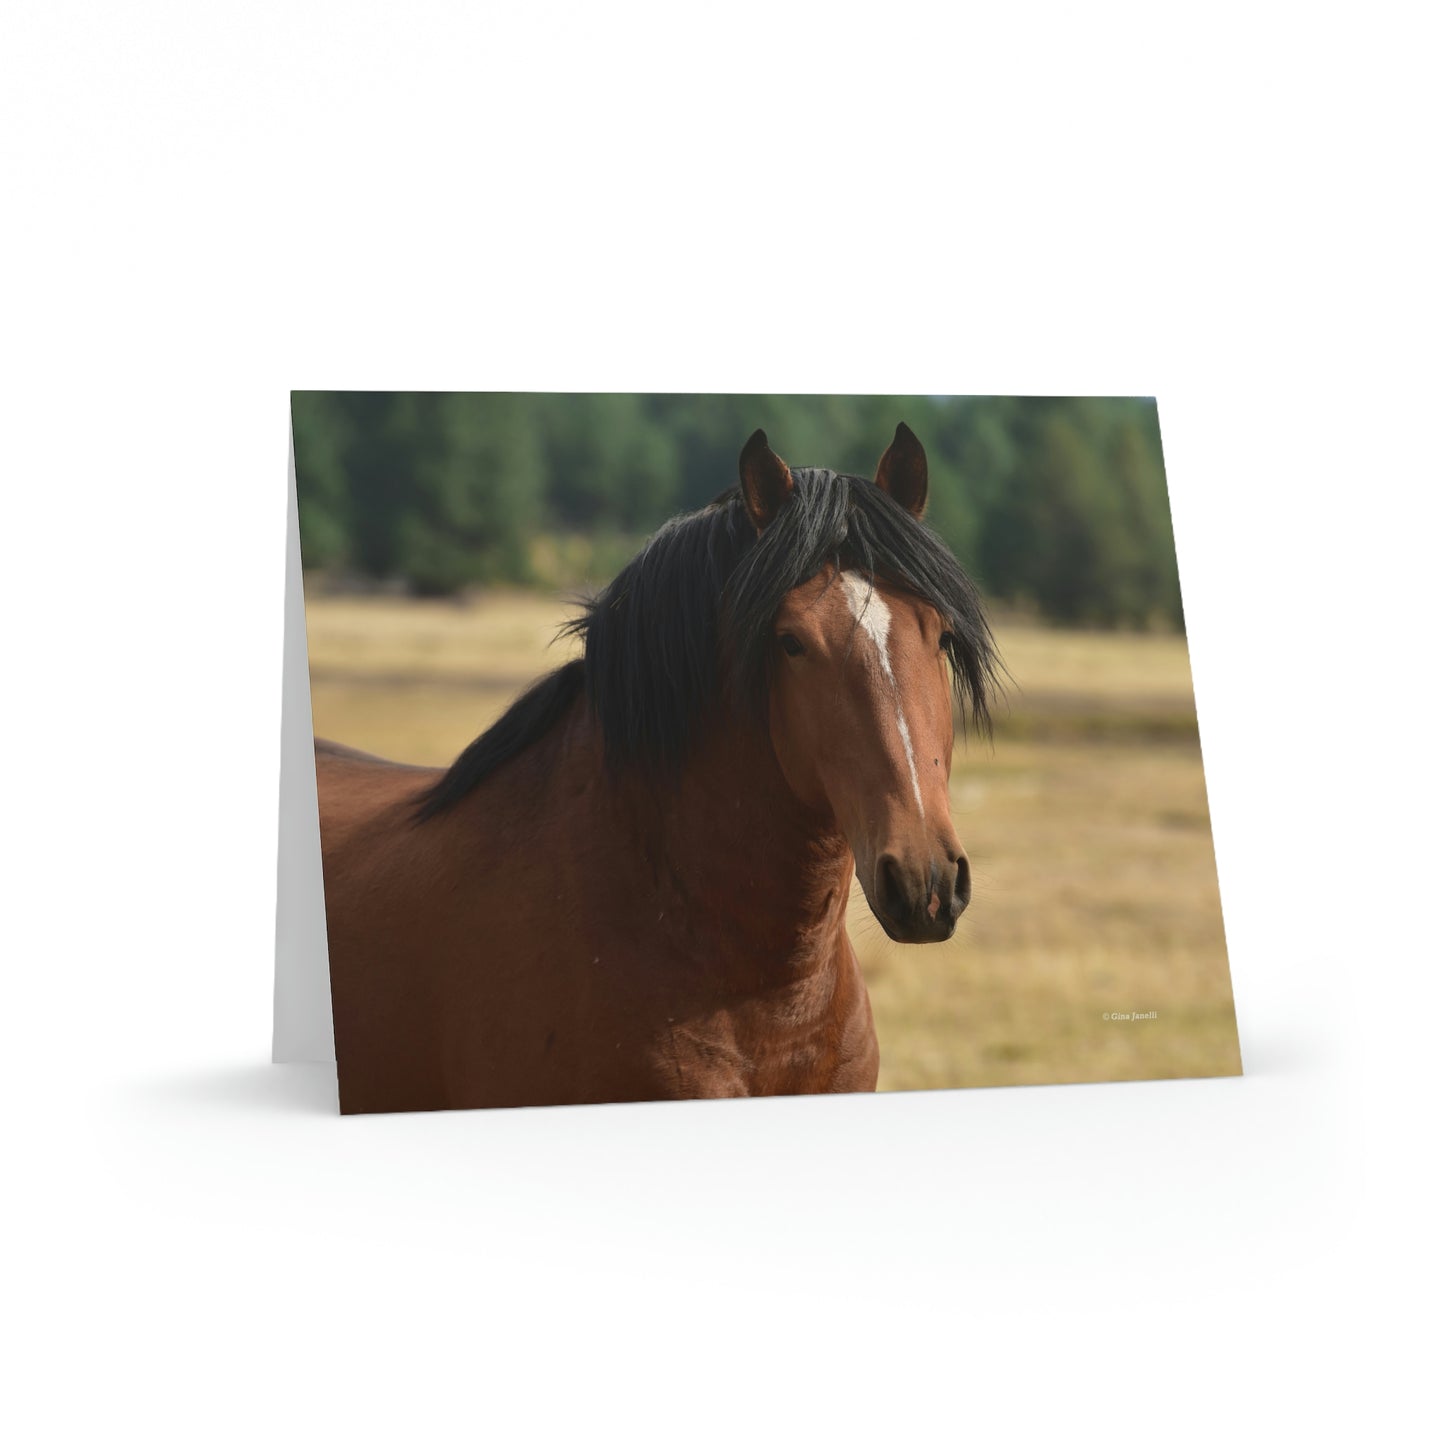 Young Stud, Wild Stallion     Greeting cards (8, 16, and 24 pcs)